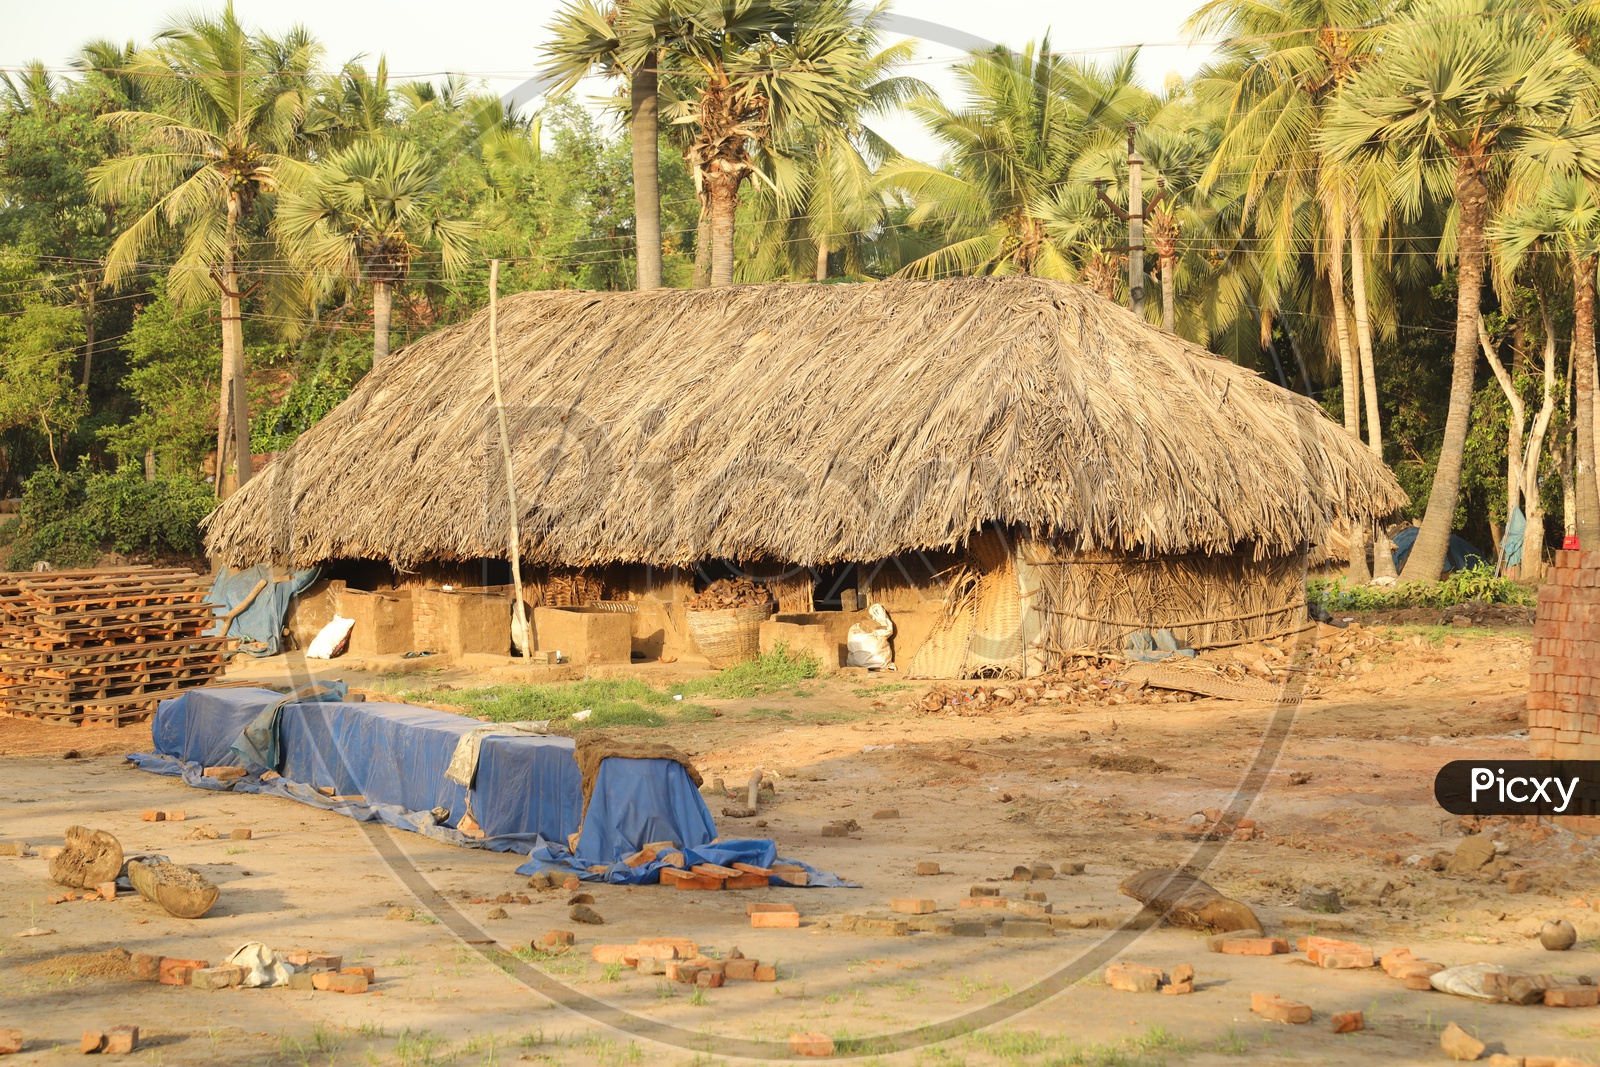 Thatched Huts In Rural Villages in India